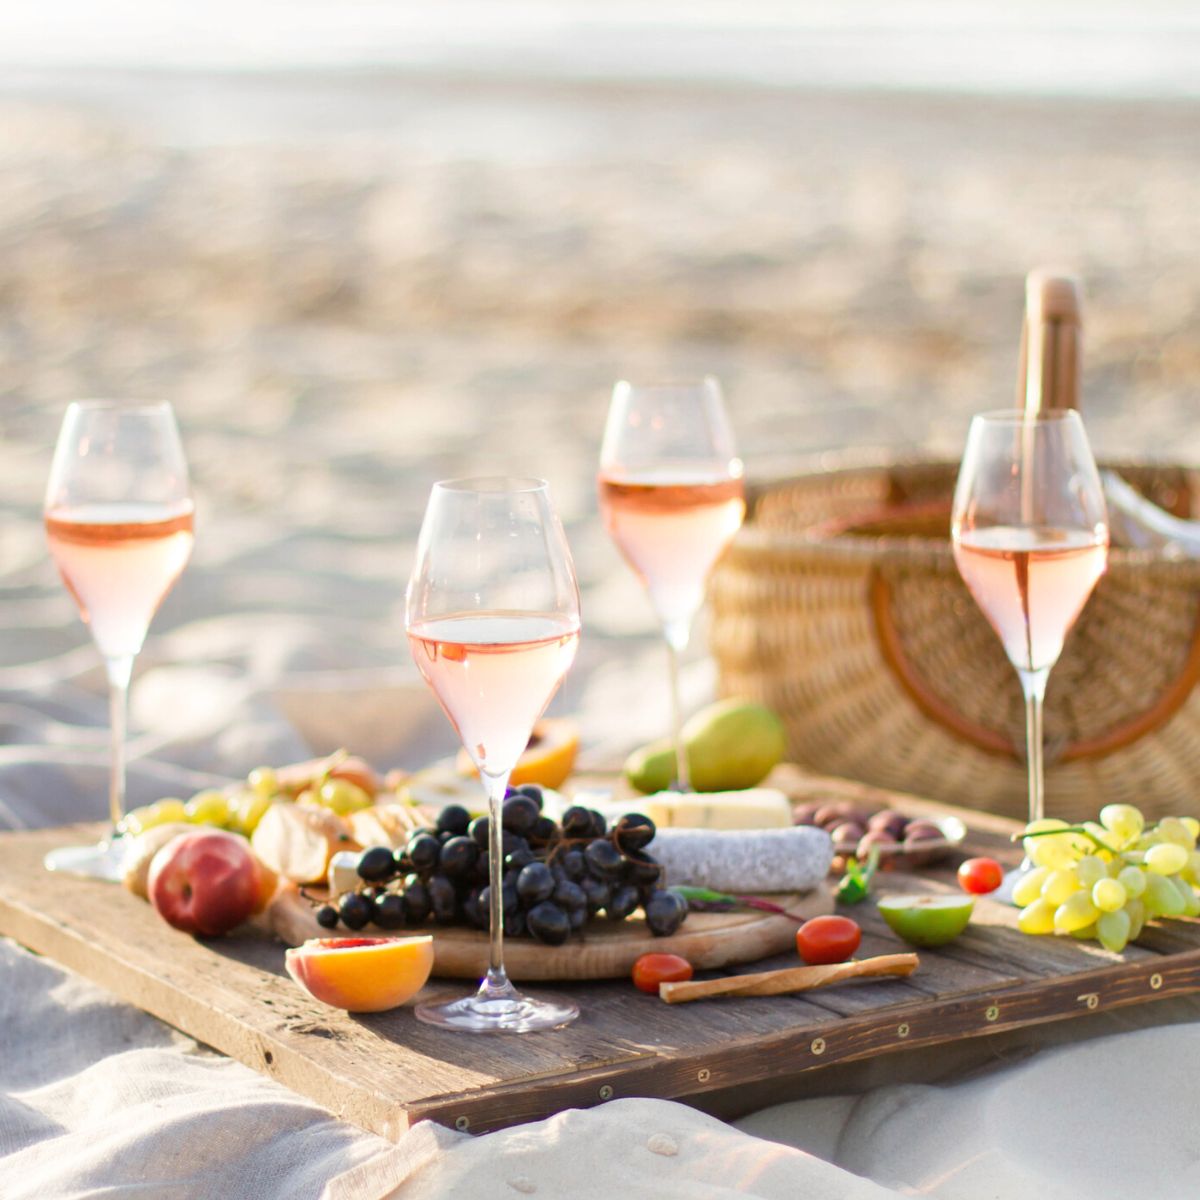 4 wine glasses and some fresh fruit and cheese sit on a wooden table on the sand next to a picnic basket.